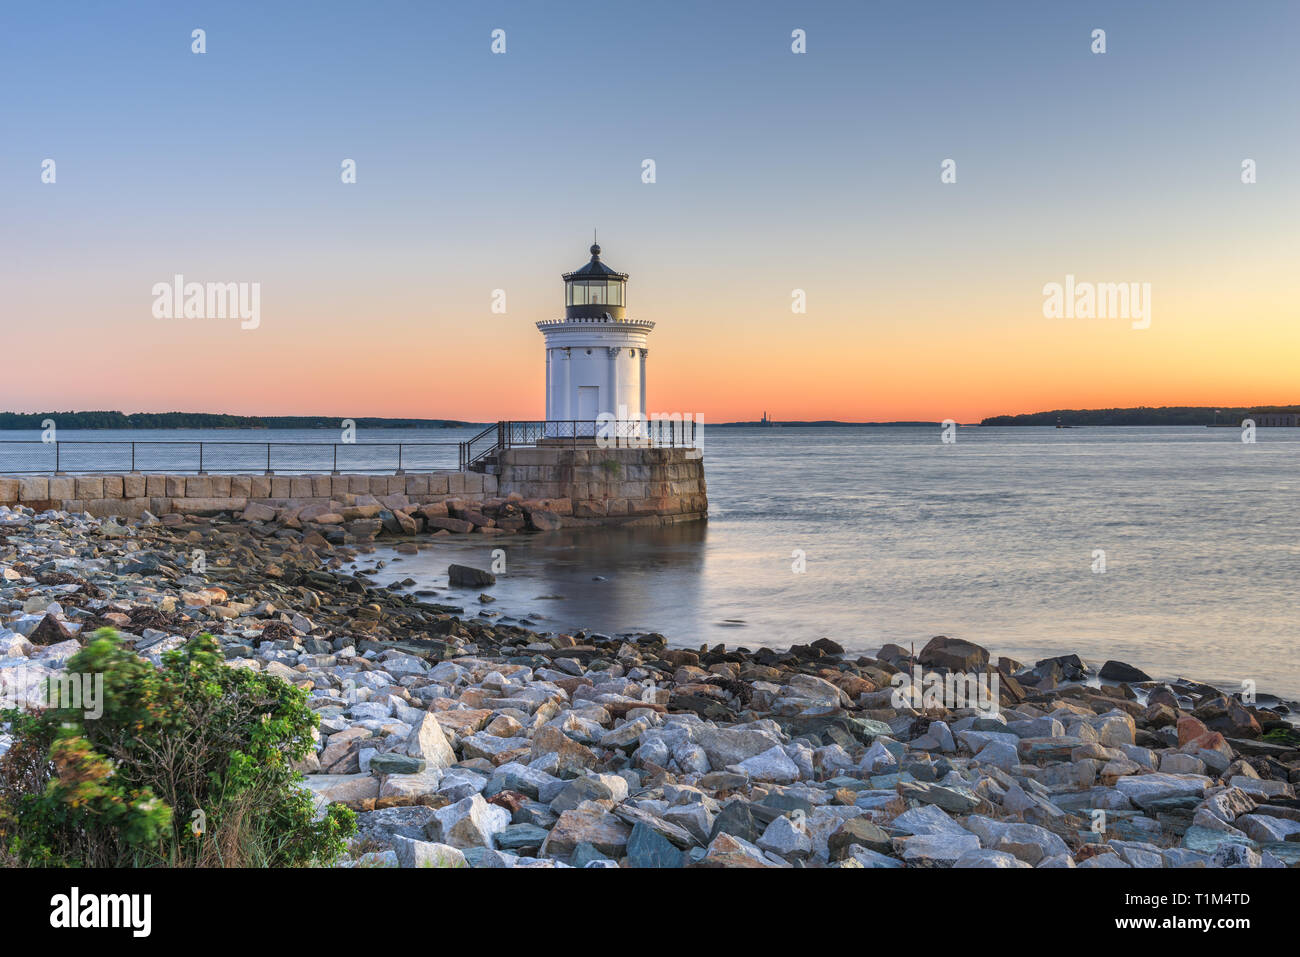 South Portland, Maine, USA with the Portland Breakwater Light at dawn. Stock Photo